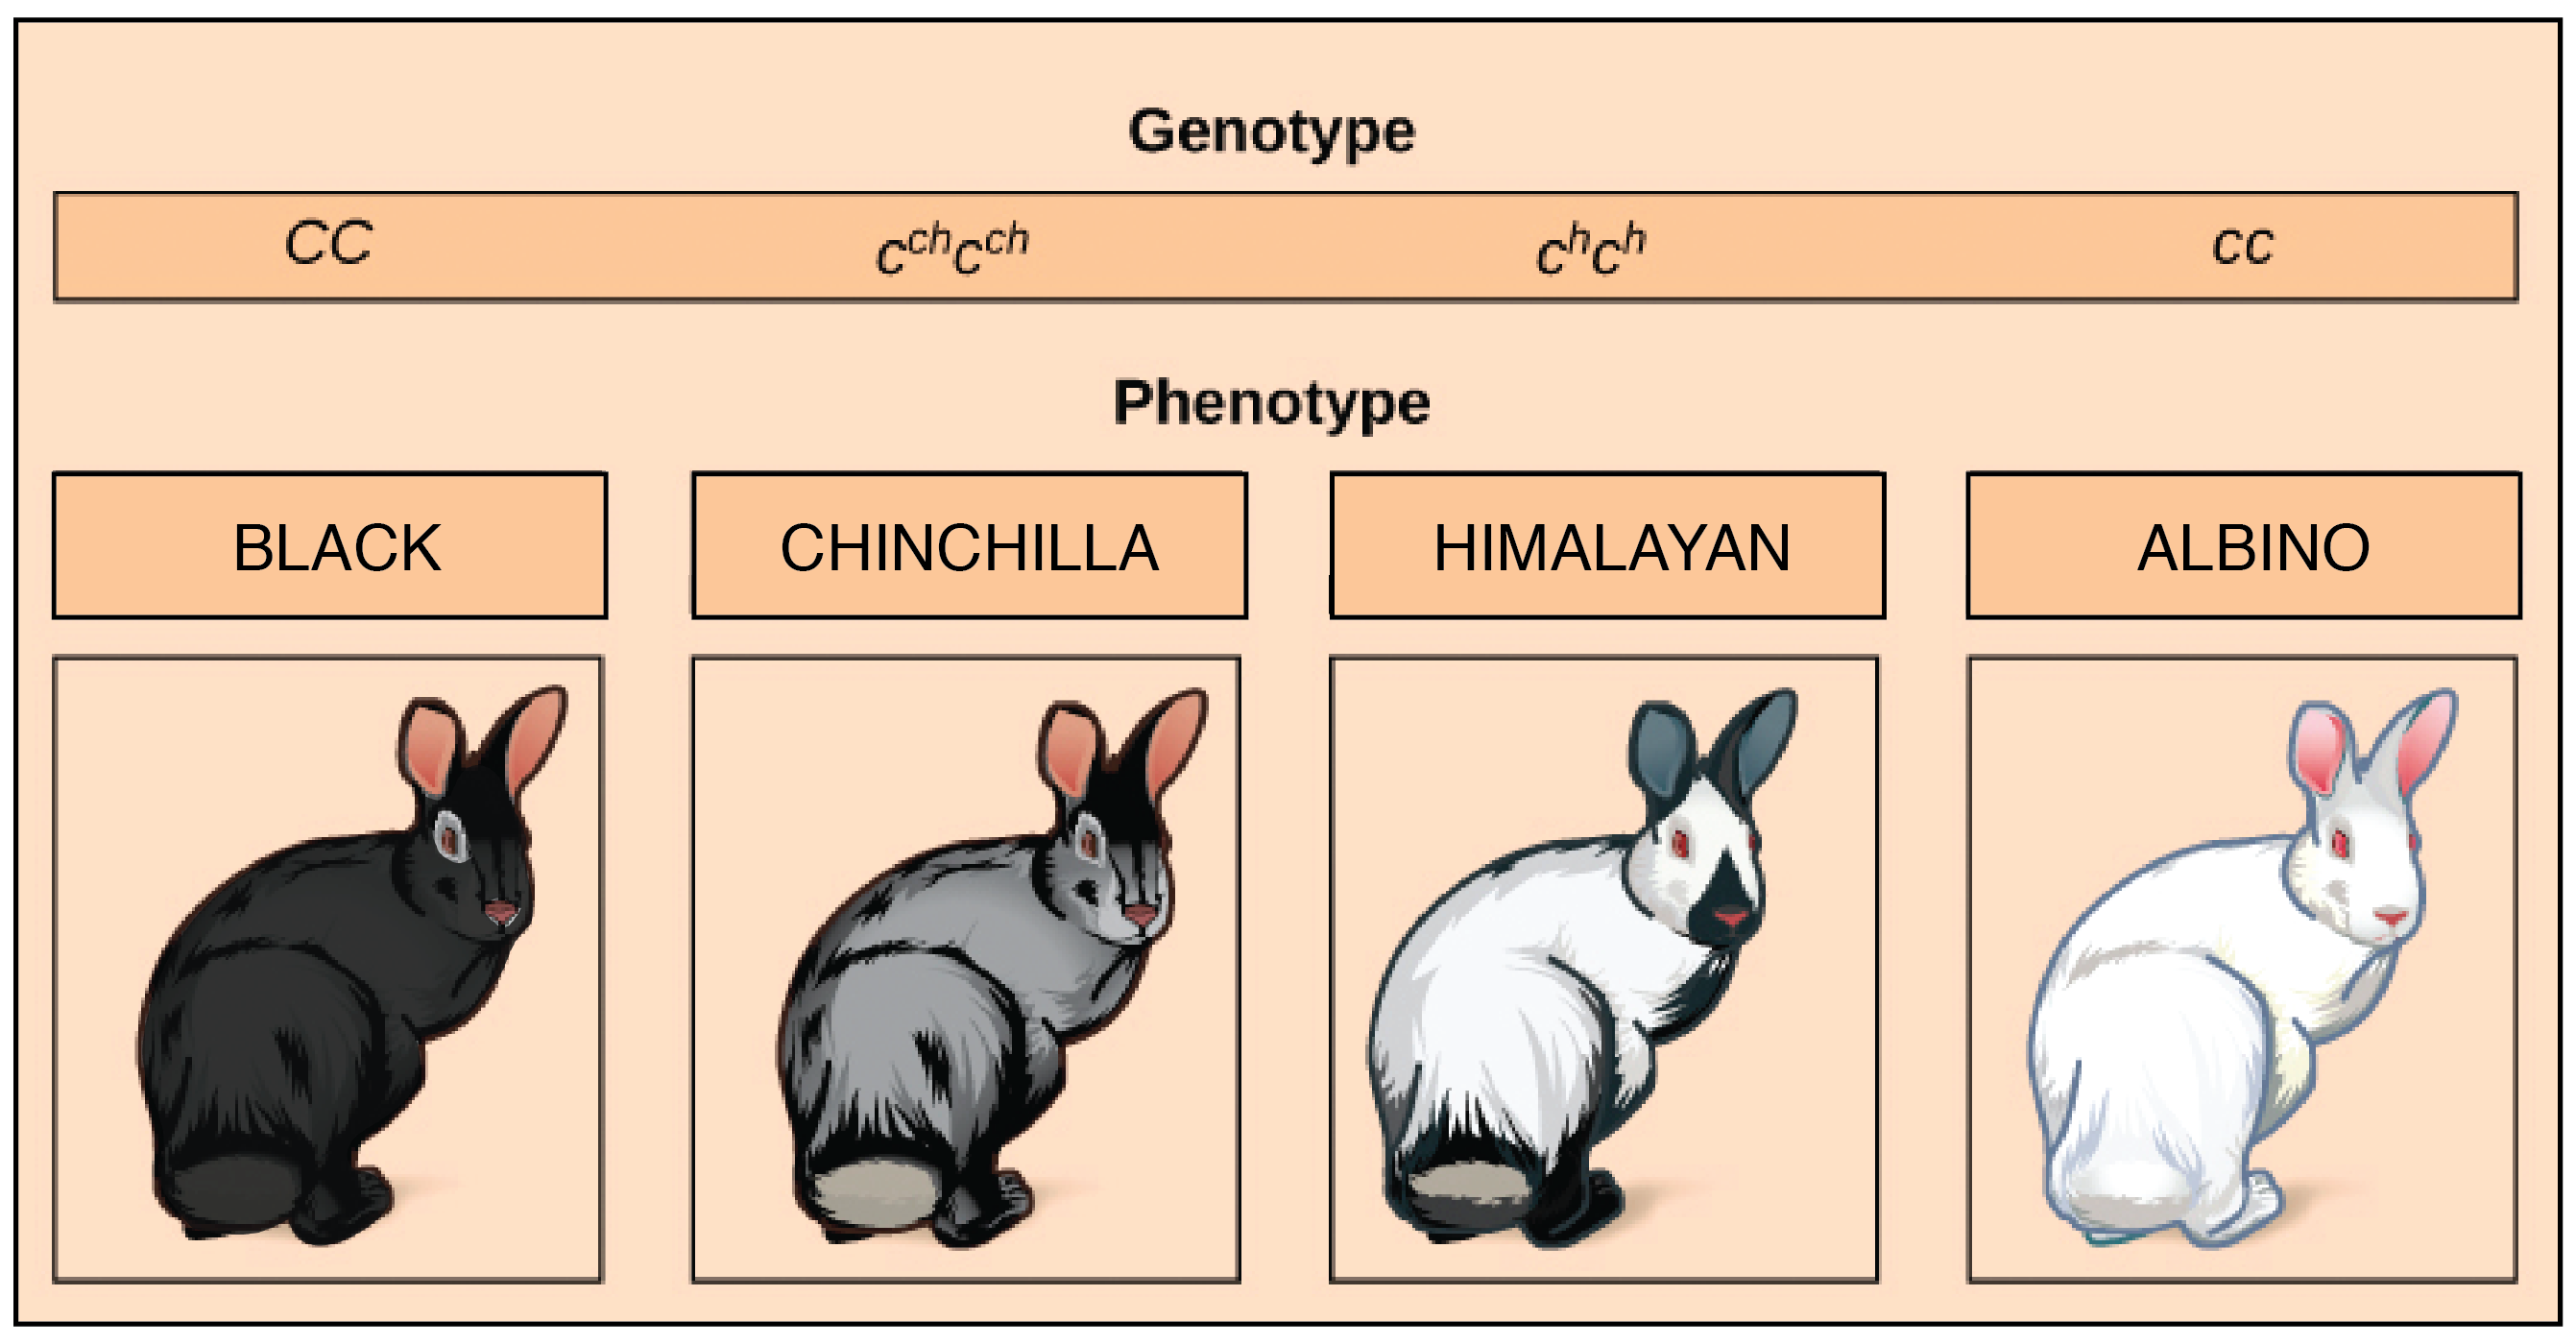 Allelic series of the color gene C in rabbits.* A $CC$ rabbit has black fur.* A $c^{ch}$$c^{ch}$ rabbit has chinchilla coloration (grayish fur).* A $c^hc^h$ rabbit has Himalayan (color-point) patterning, with a white body and dark extremities.* A $cc$ rabbit is albino, with a pure white coat.